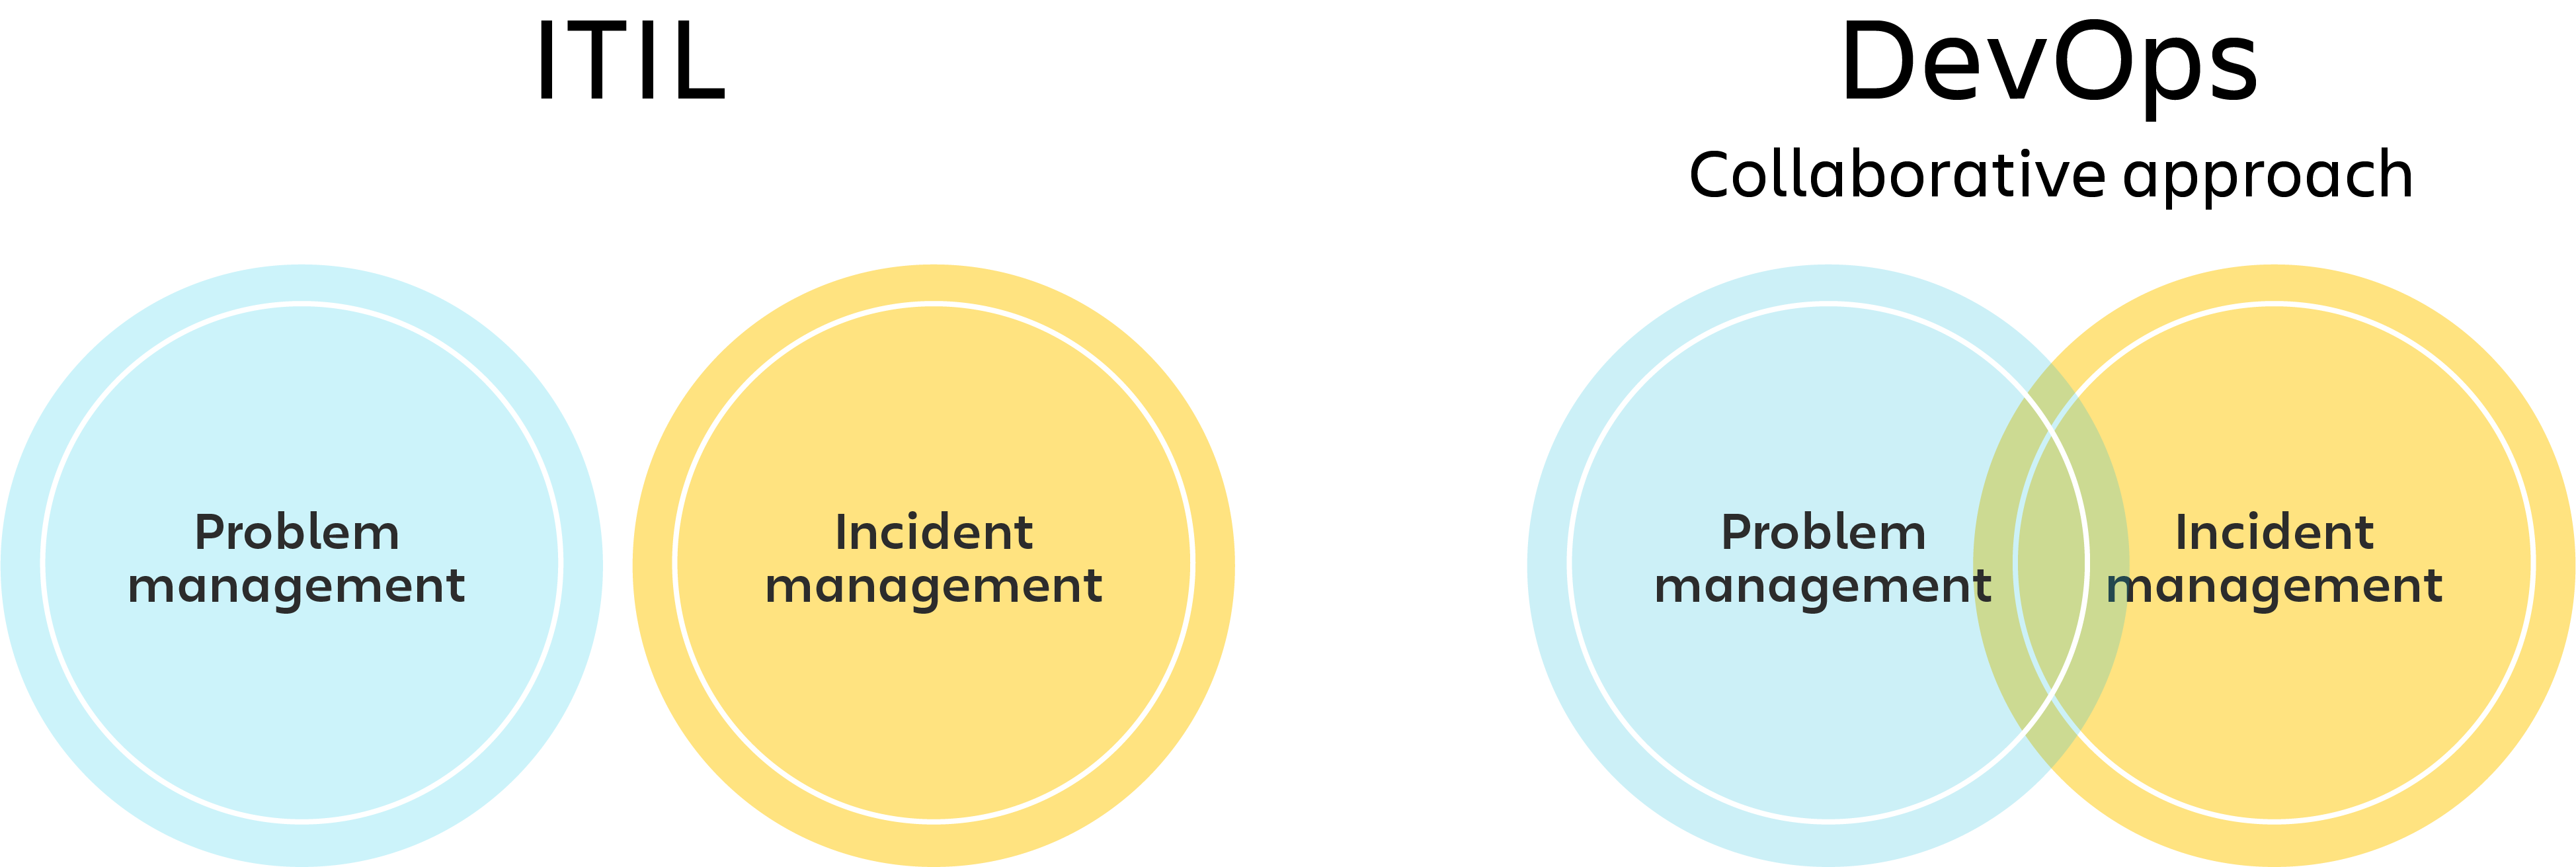 ITIL diagram with separate problem and incident management circles and DevOps diagram with venn diagram of problem and incident management